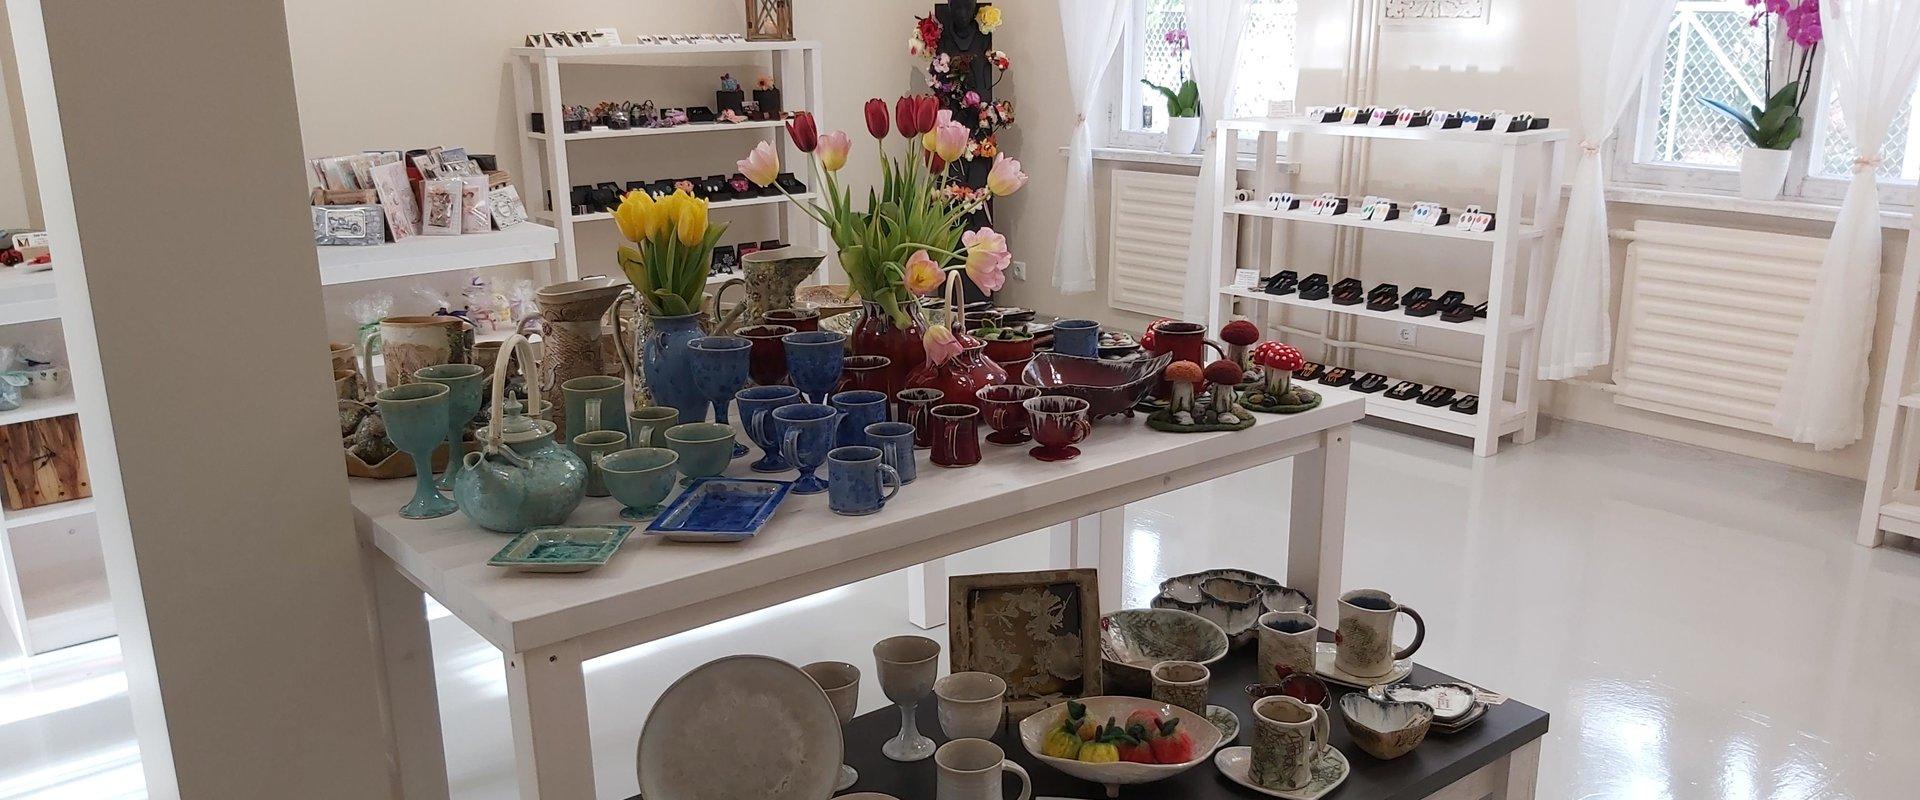 The Guild Shop of Mary Magdalene Guild offers beautiful Estonian handicrafts from the Guild's masters as well as other craftsmen. The store has a larg